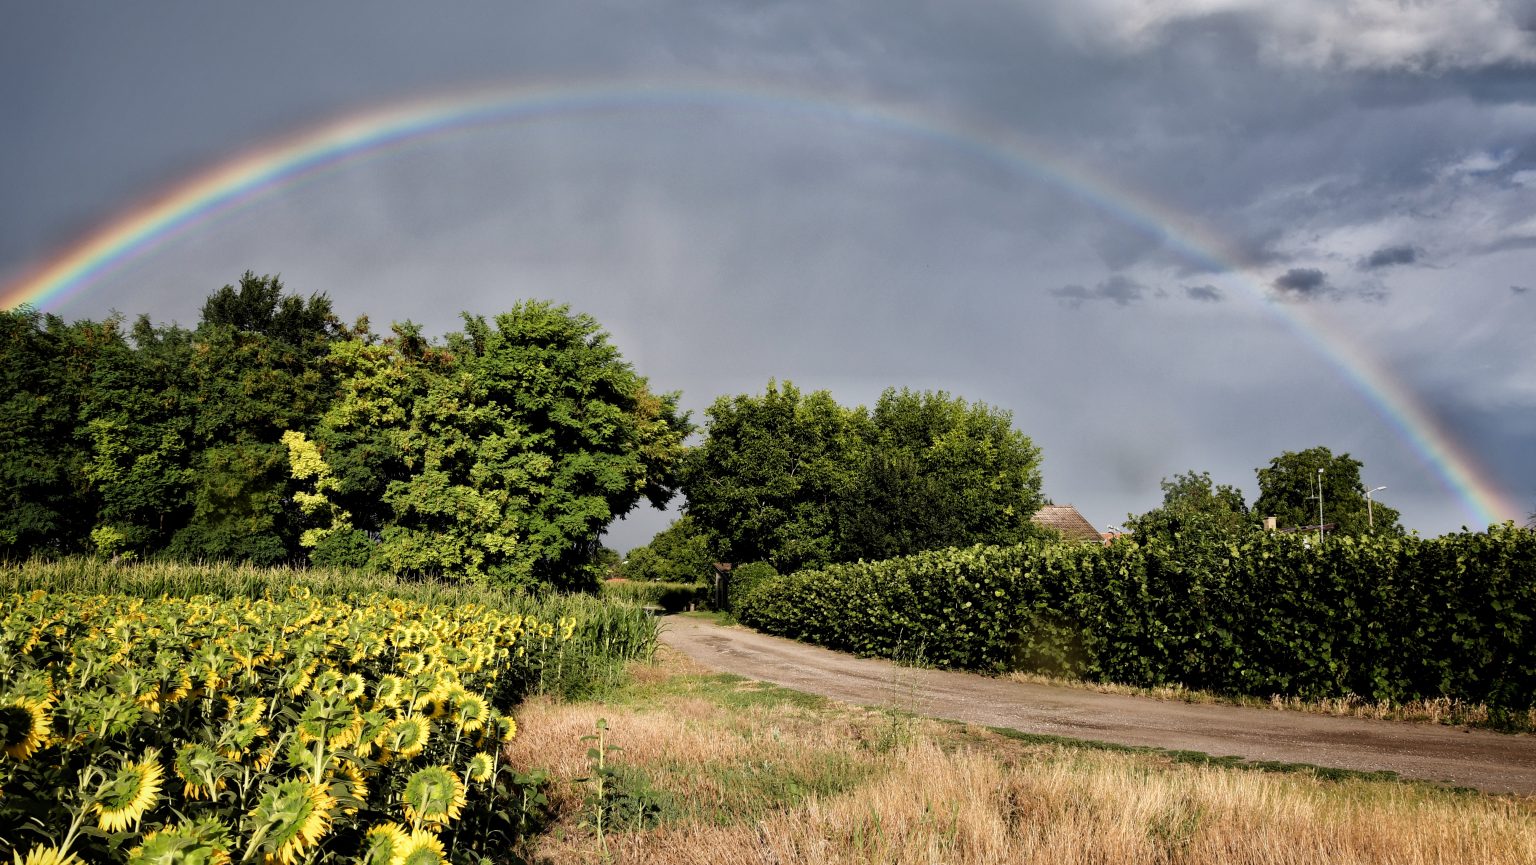 Countryside landscape in Alibunar, Serbia, with rainy sky and a rainbow. Photo contributed by Grunfi to the WordPress Photo Directory.